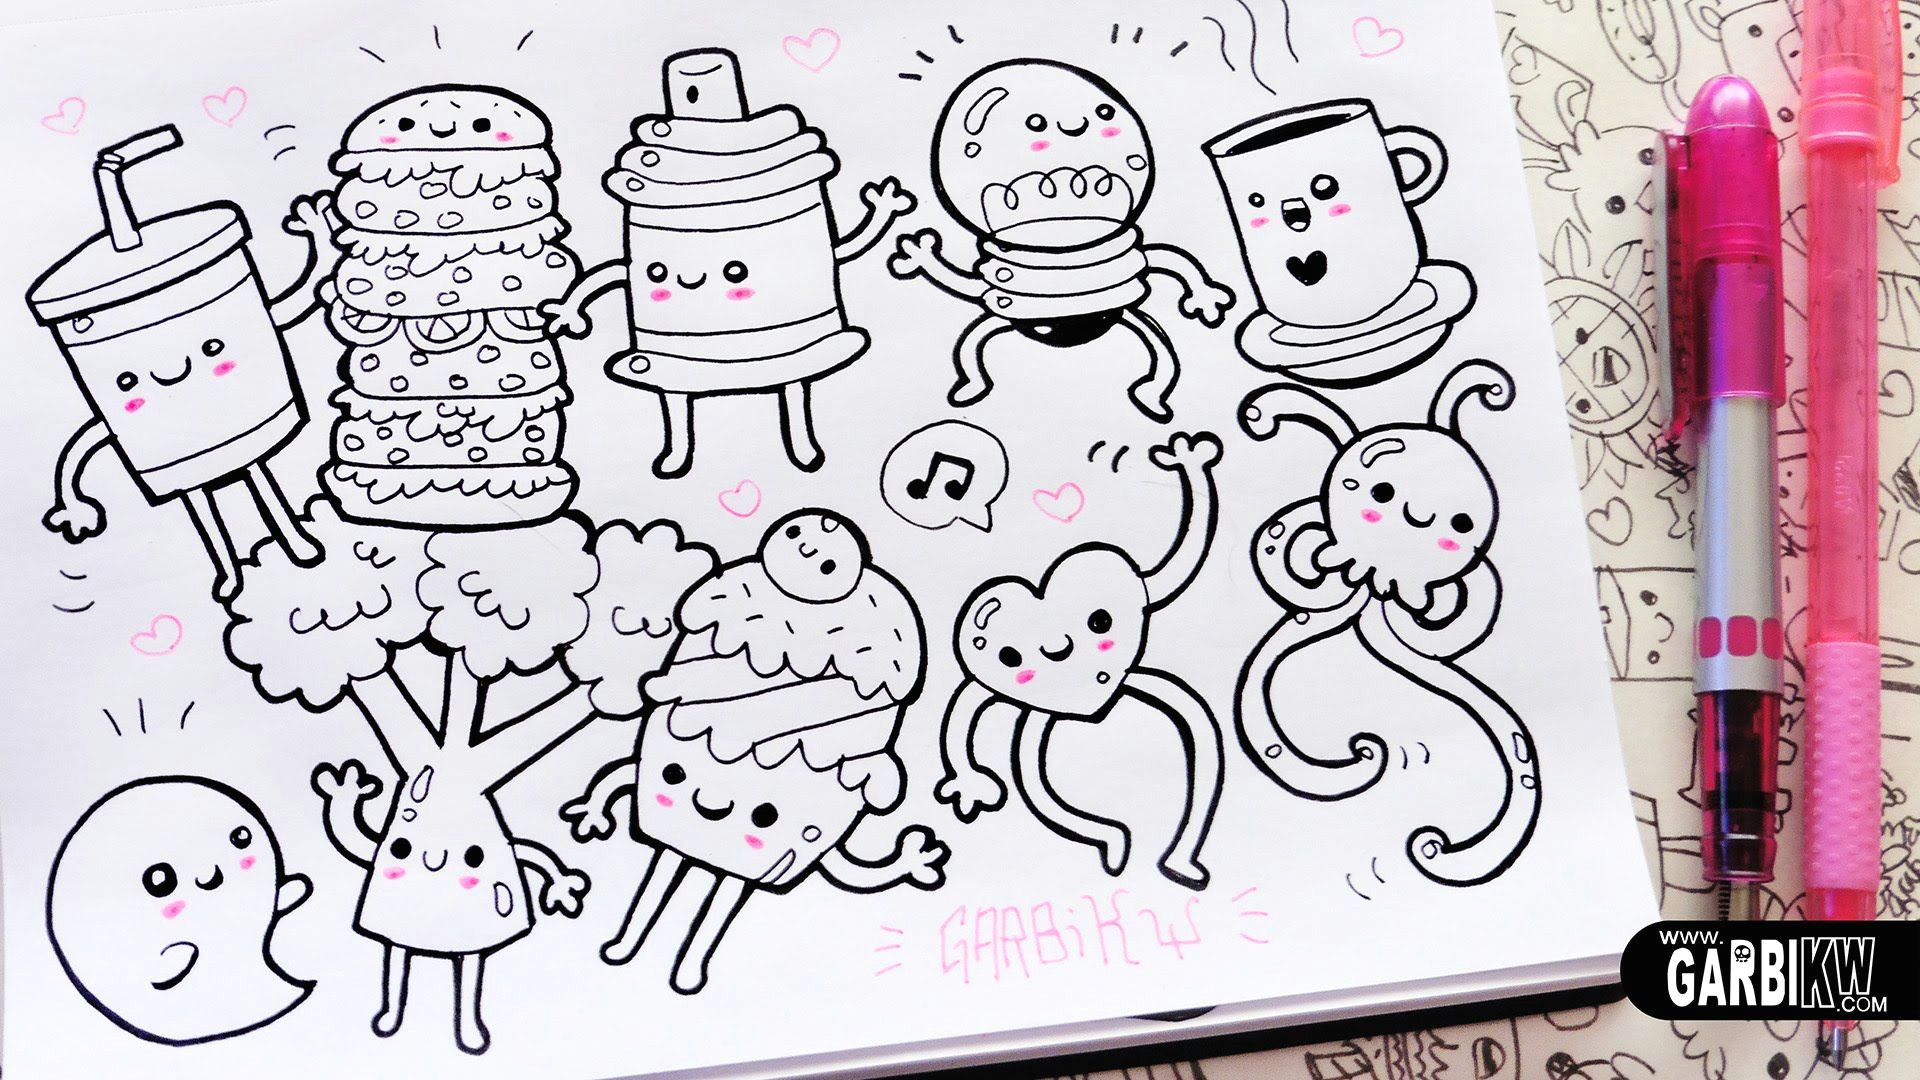 V Easy Drawing 10 Little Drawings for Your Doodles Easy and Kawaii Drawings by